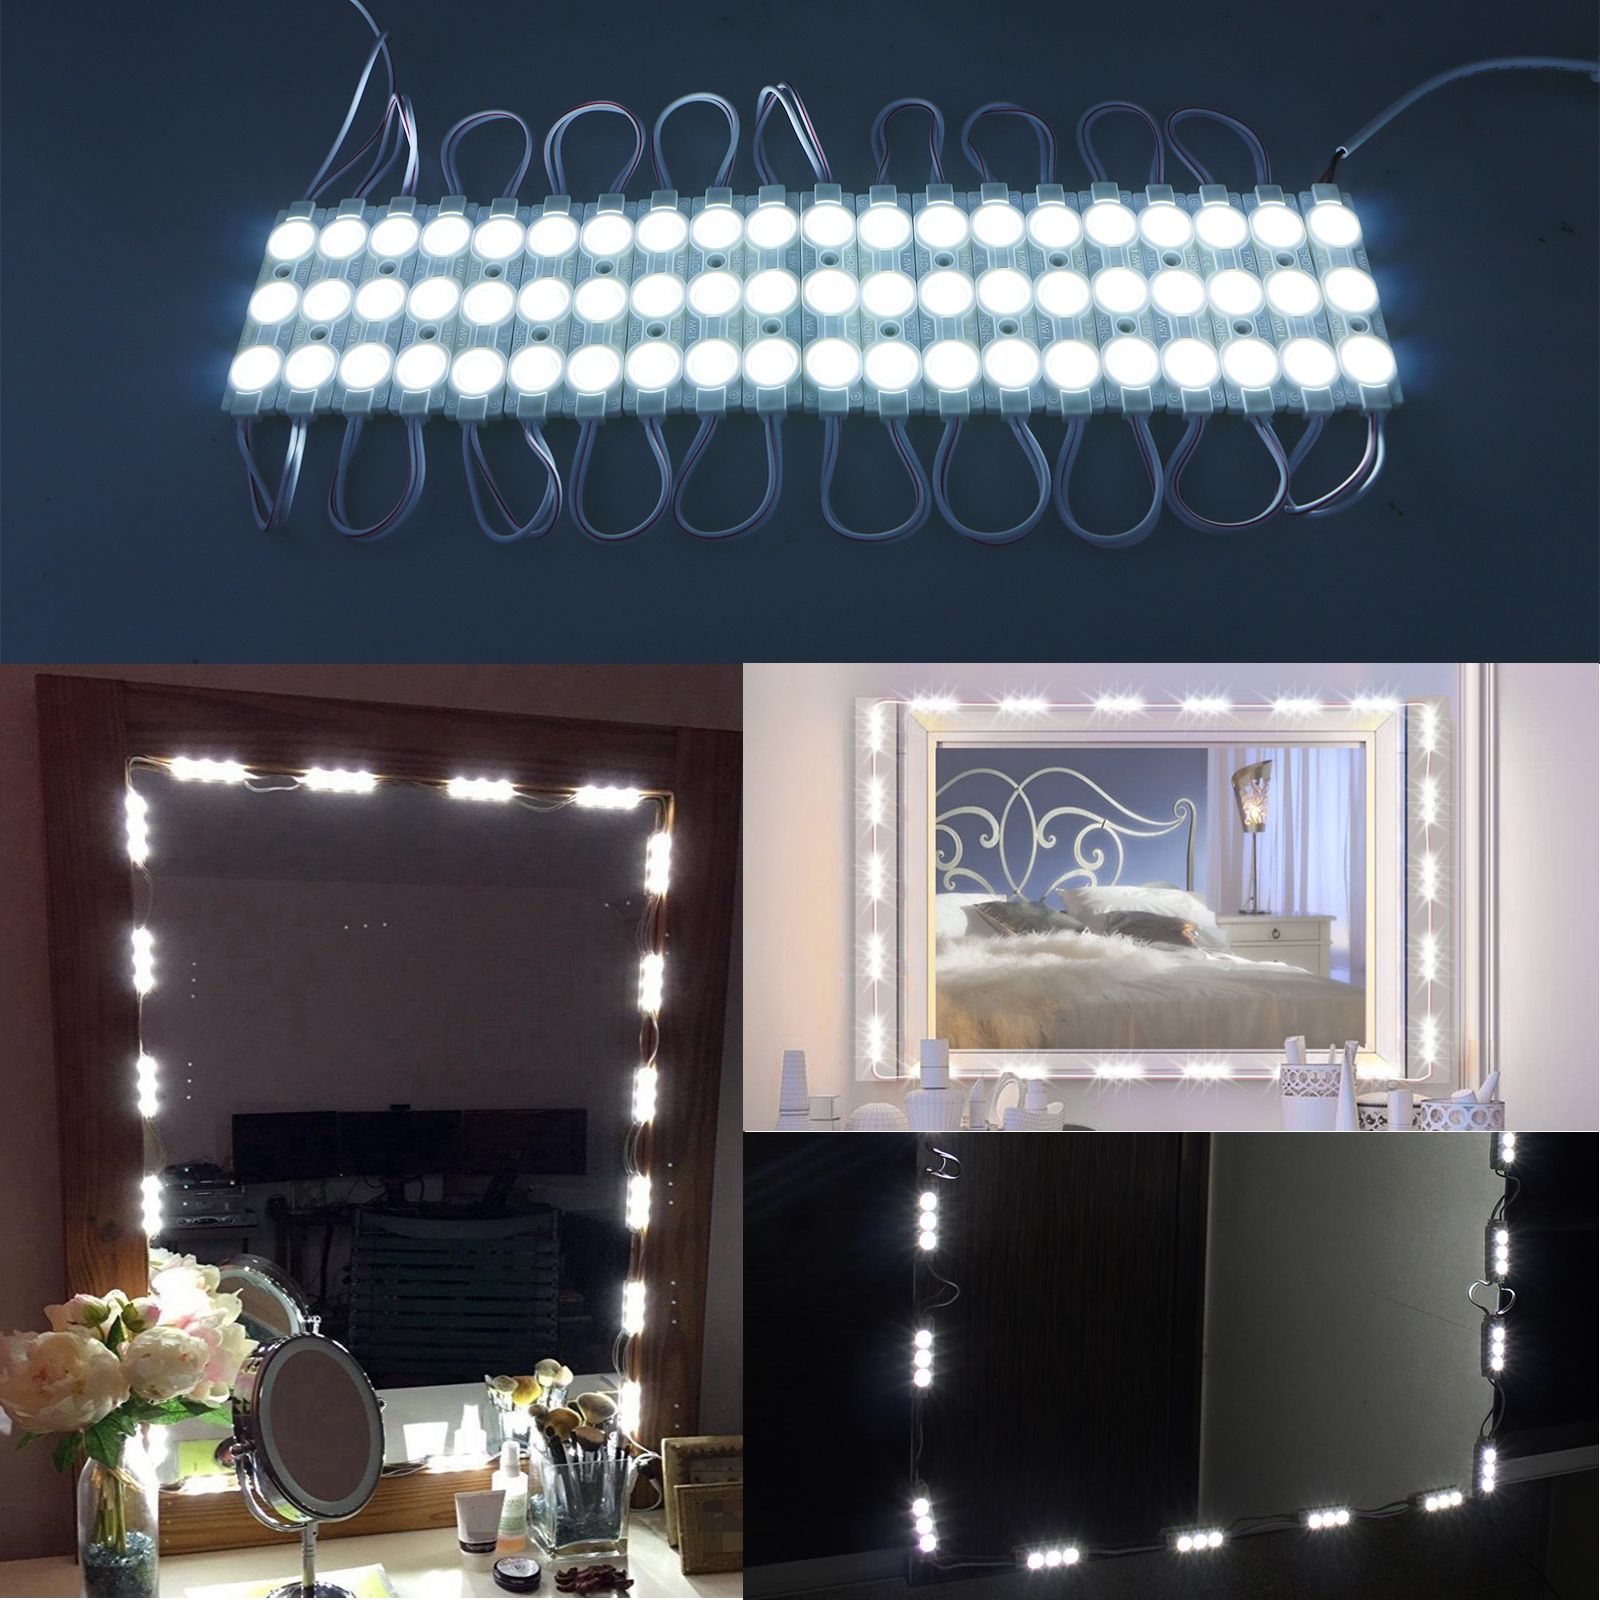 Yundap Lighted Mirror Led Light, Dimmable 60 Led Vanity Mirror Lights Within Tunable Led Vanity Mirrors (View 15 of 15)